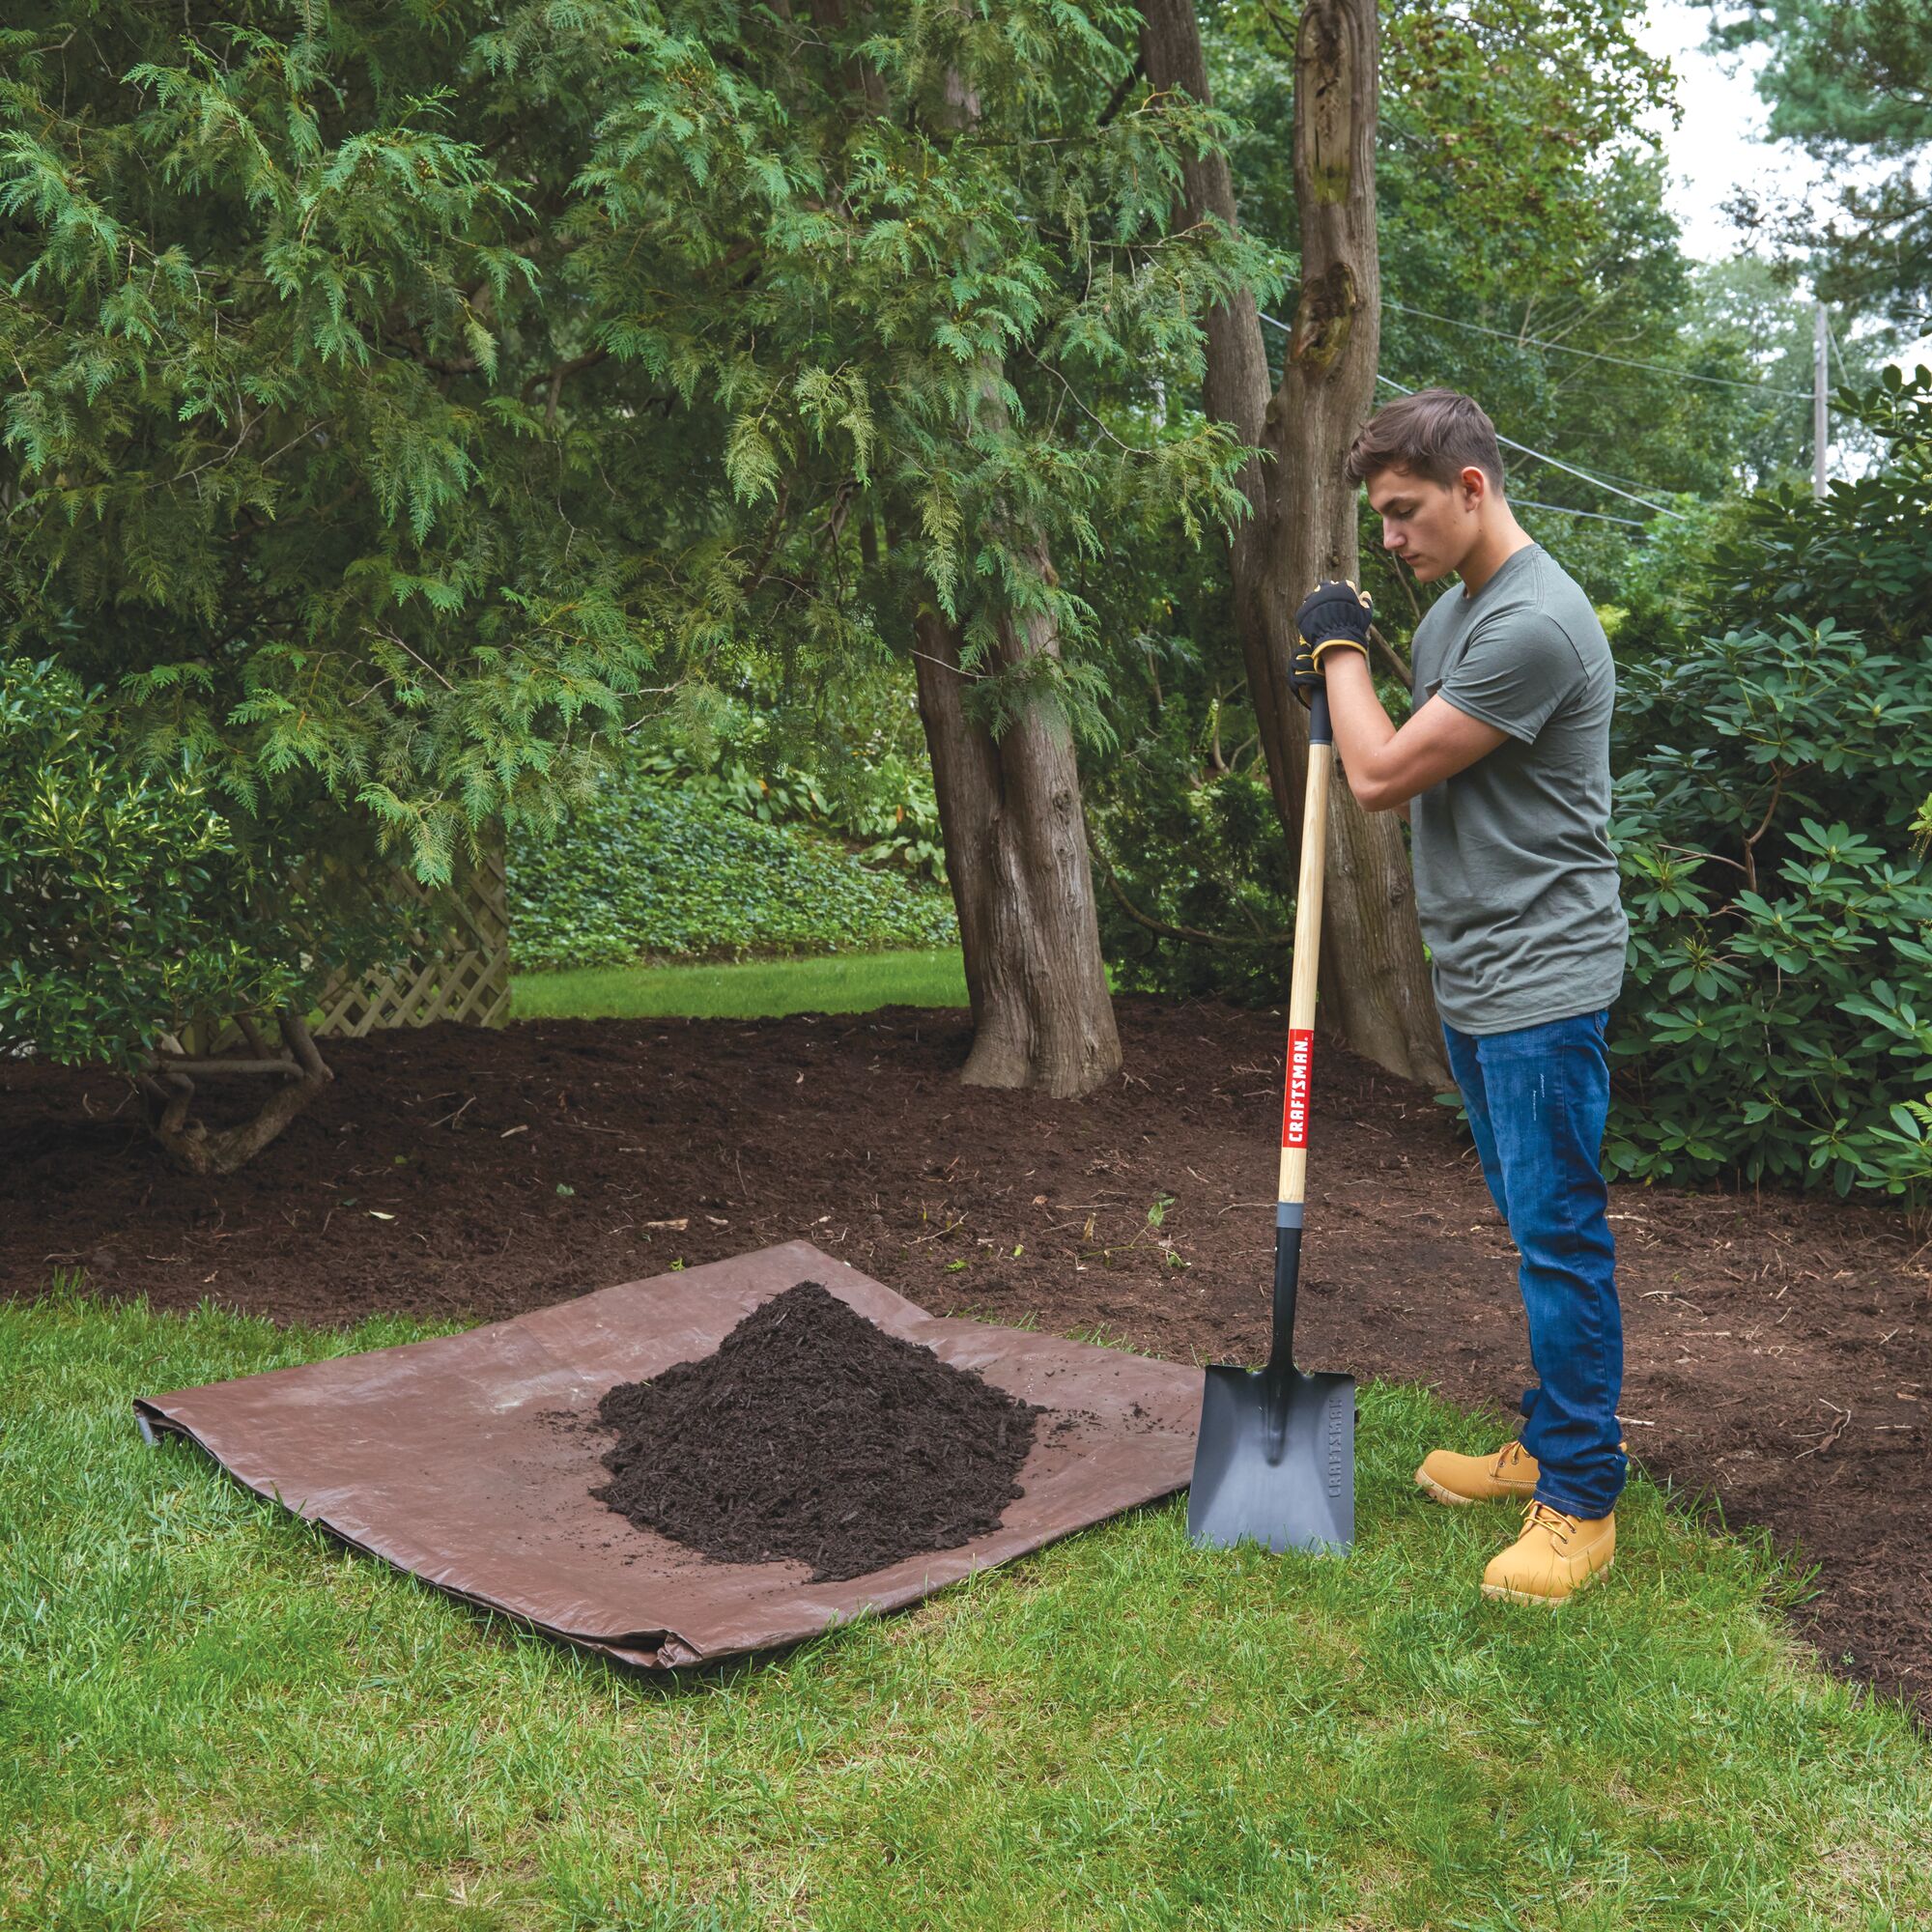 Wood handle transfer shovel being used in lawn.